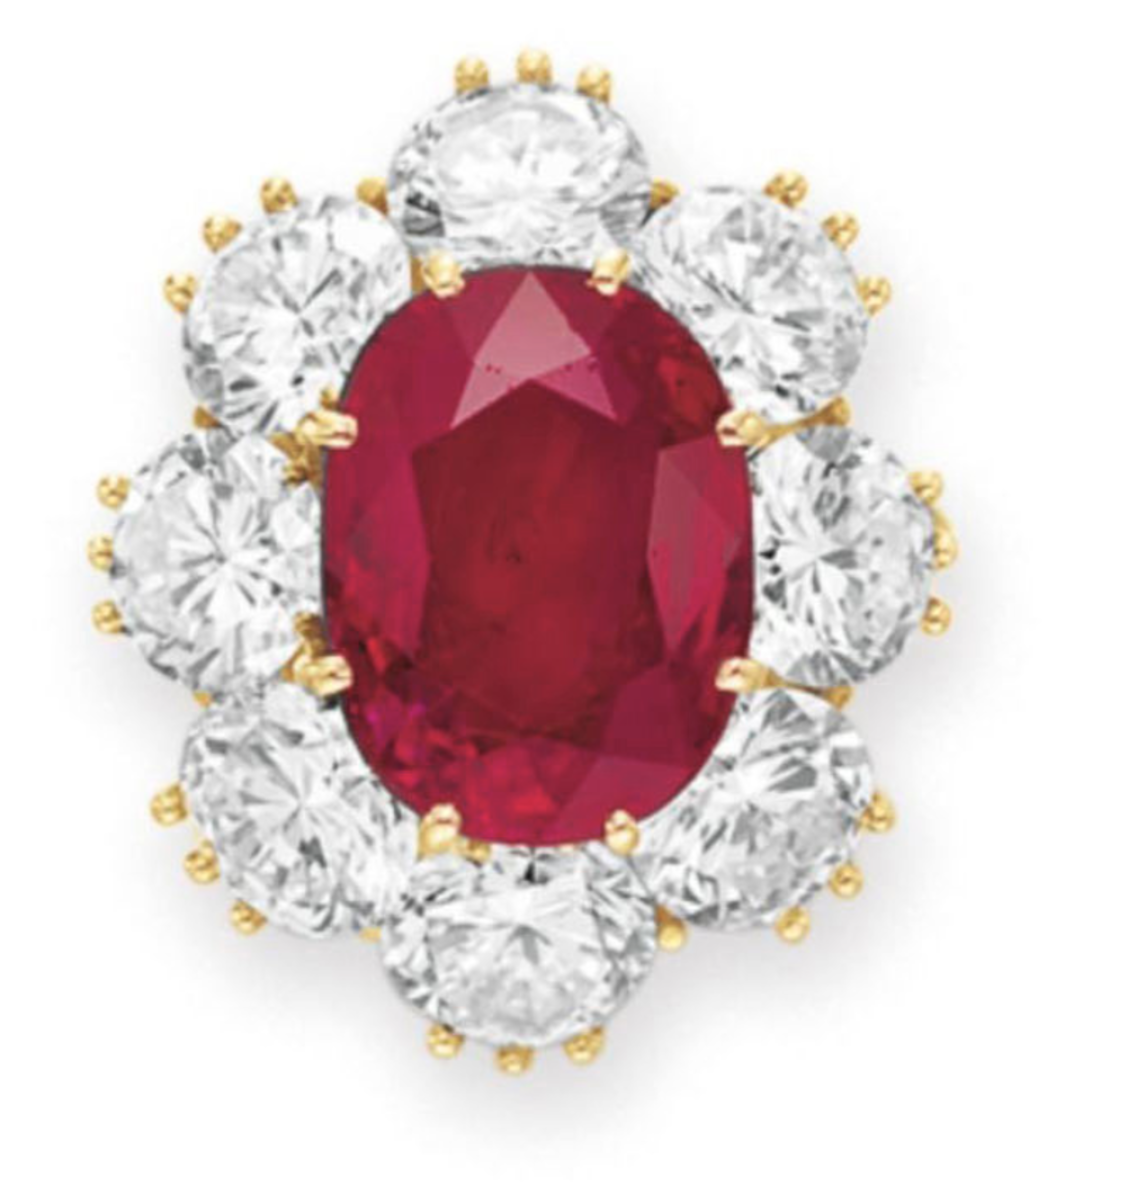 Burton gave Taylor this ruby and diamond ring as a stocking stuffer for Christmas in 1968. This sold for $4.2 million.